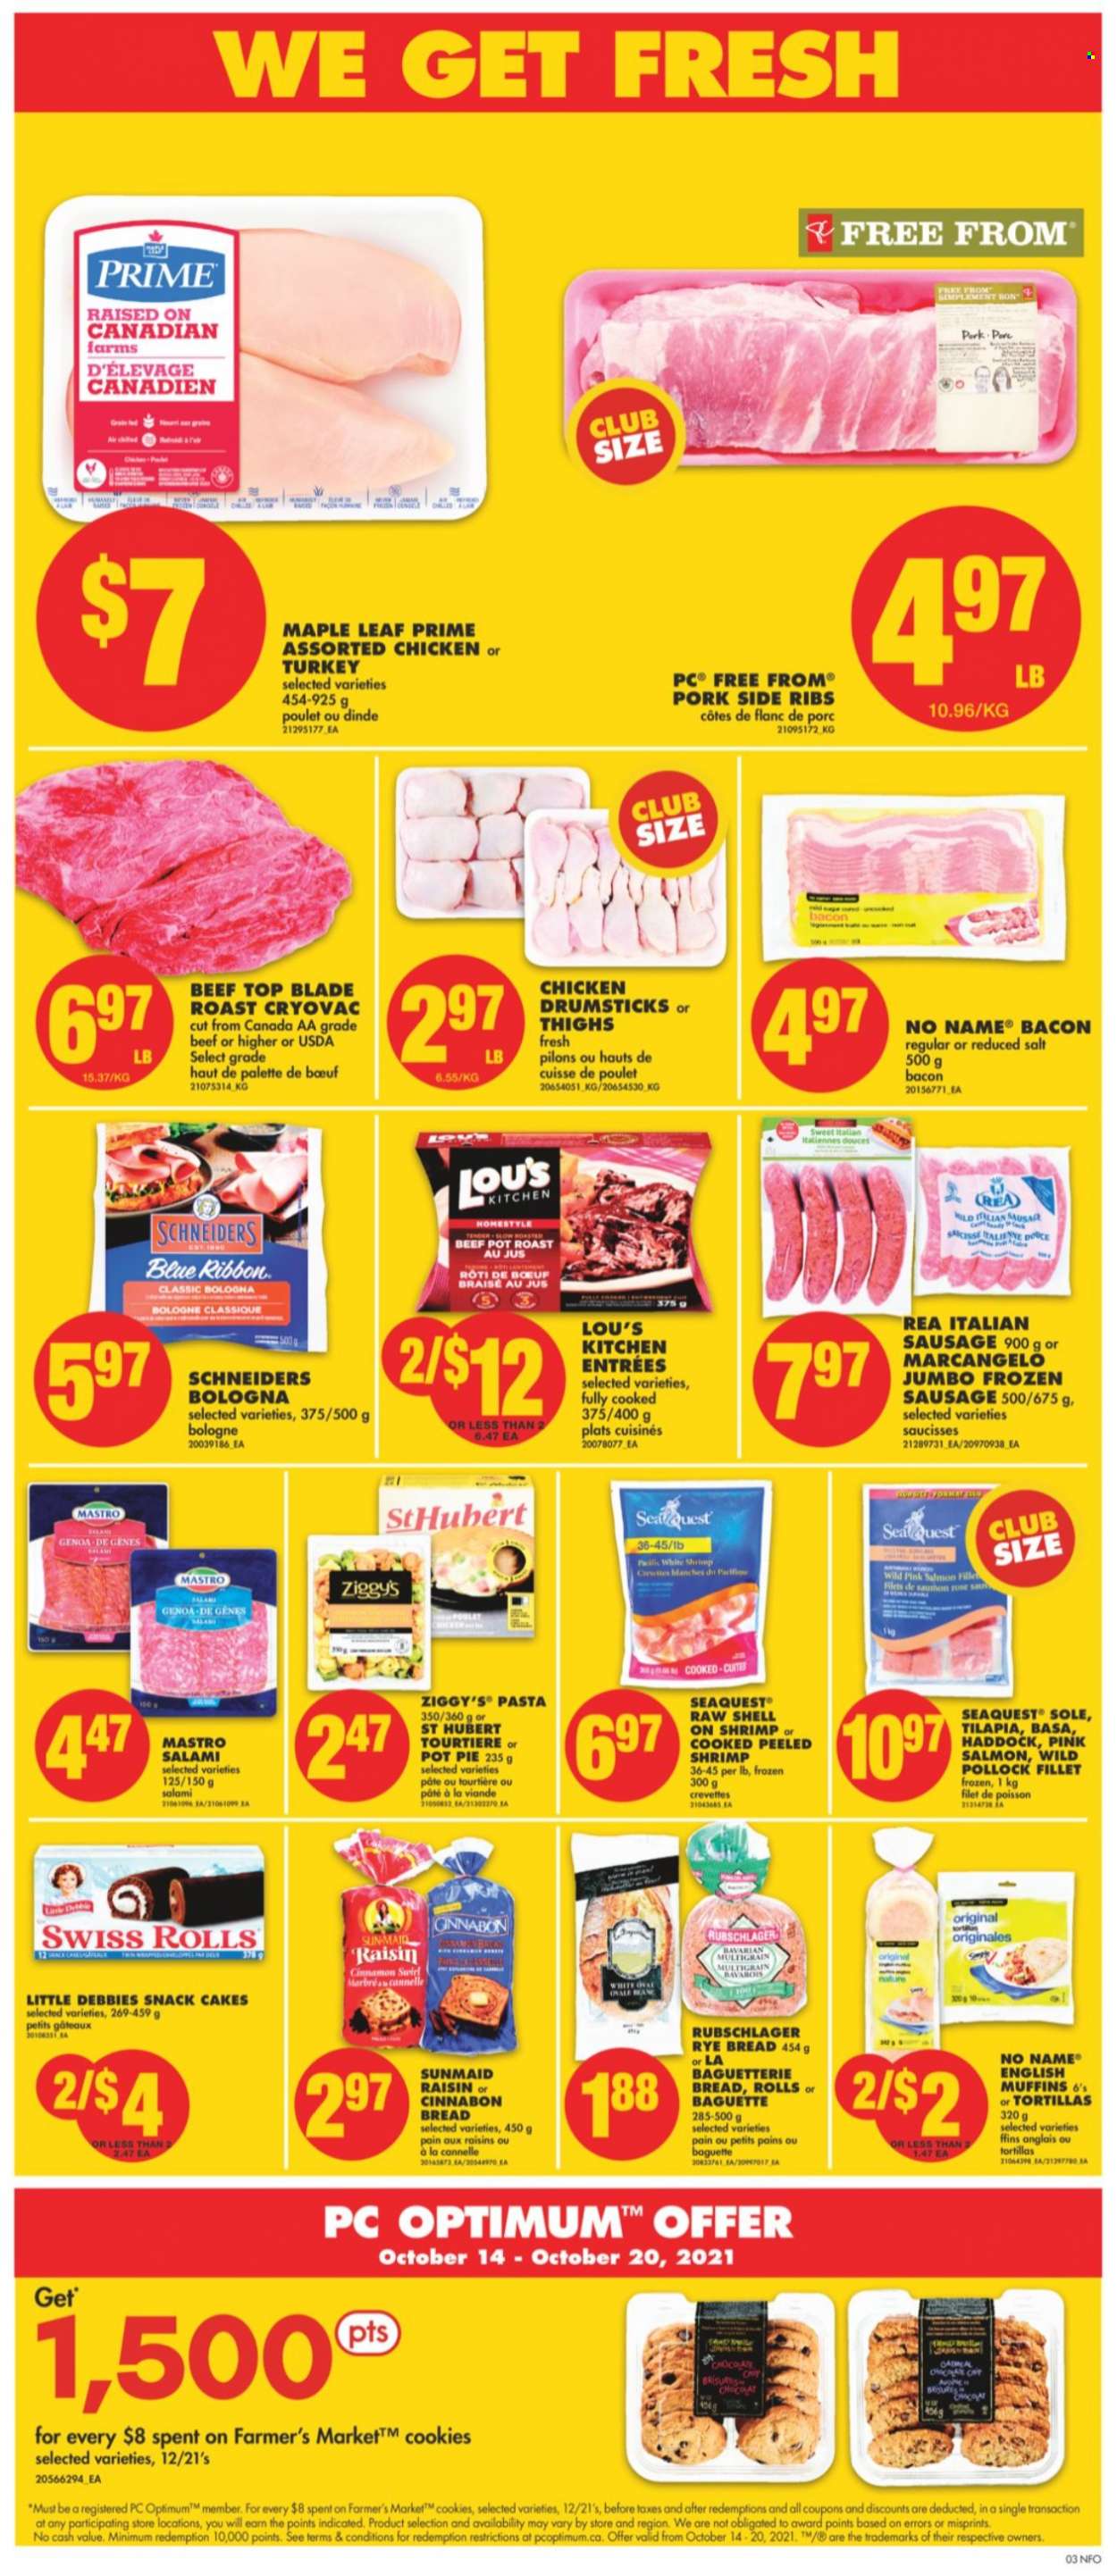 thumbnail - No Frills Flyer - October 14, 2021 - October 20, 2021 - Sales products - english muffins, tortillas, cake, pie, Blue Ribbon, pot pie, salmon, tilapia, haddock, pollock, No Name, pasta, bacon, salami, bologna sausage, sausage, italian sausage, cookies, snack, salt, cinnamon, dried fruit, chicken drumsticks, chicken, beef meat, top blade, Palette, pot, baguette, raisins. Page 4.